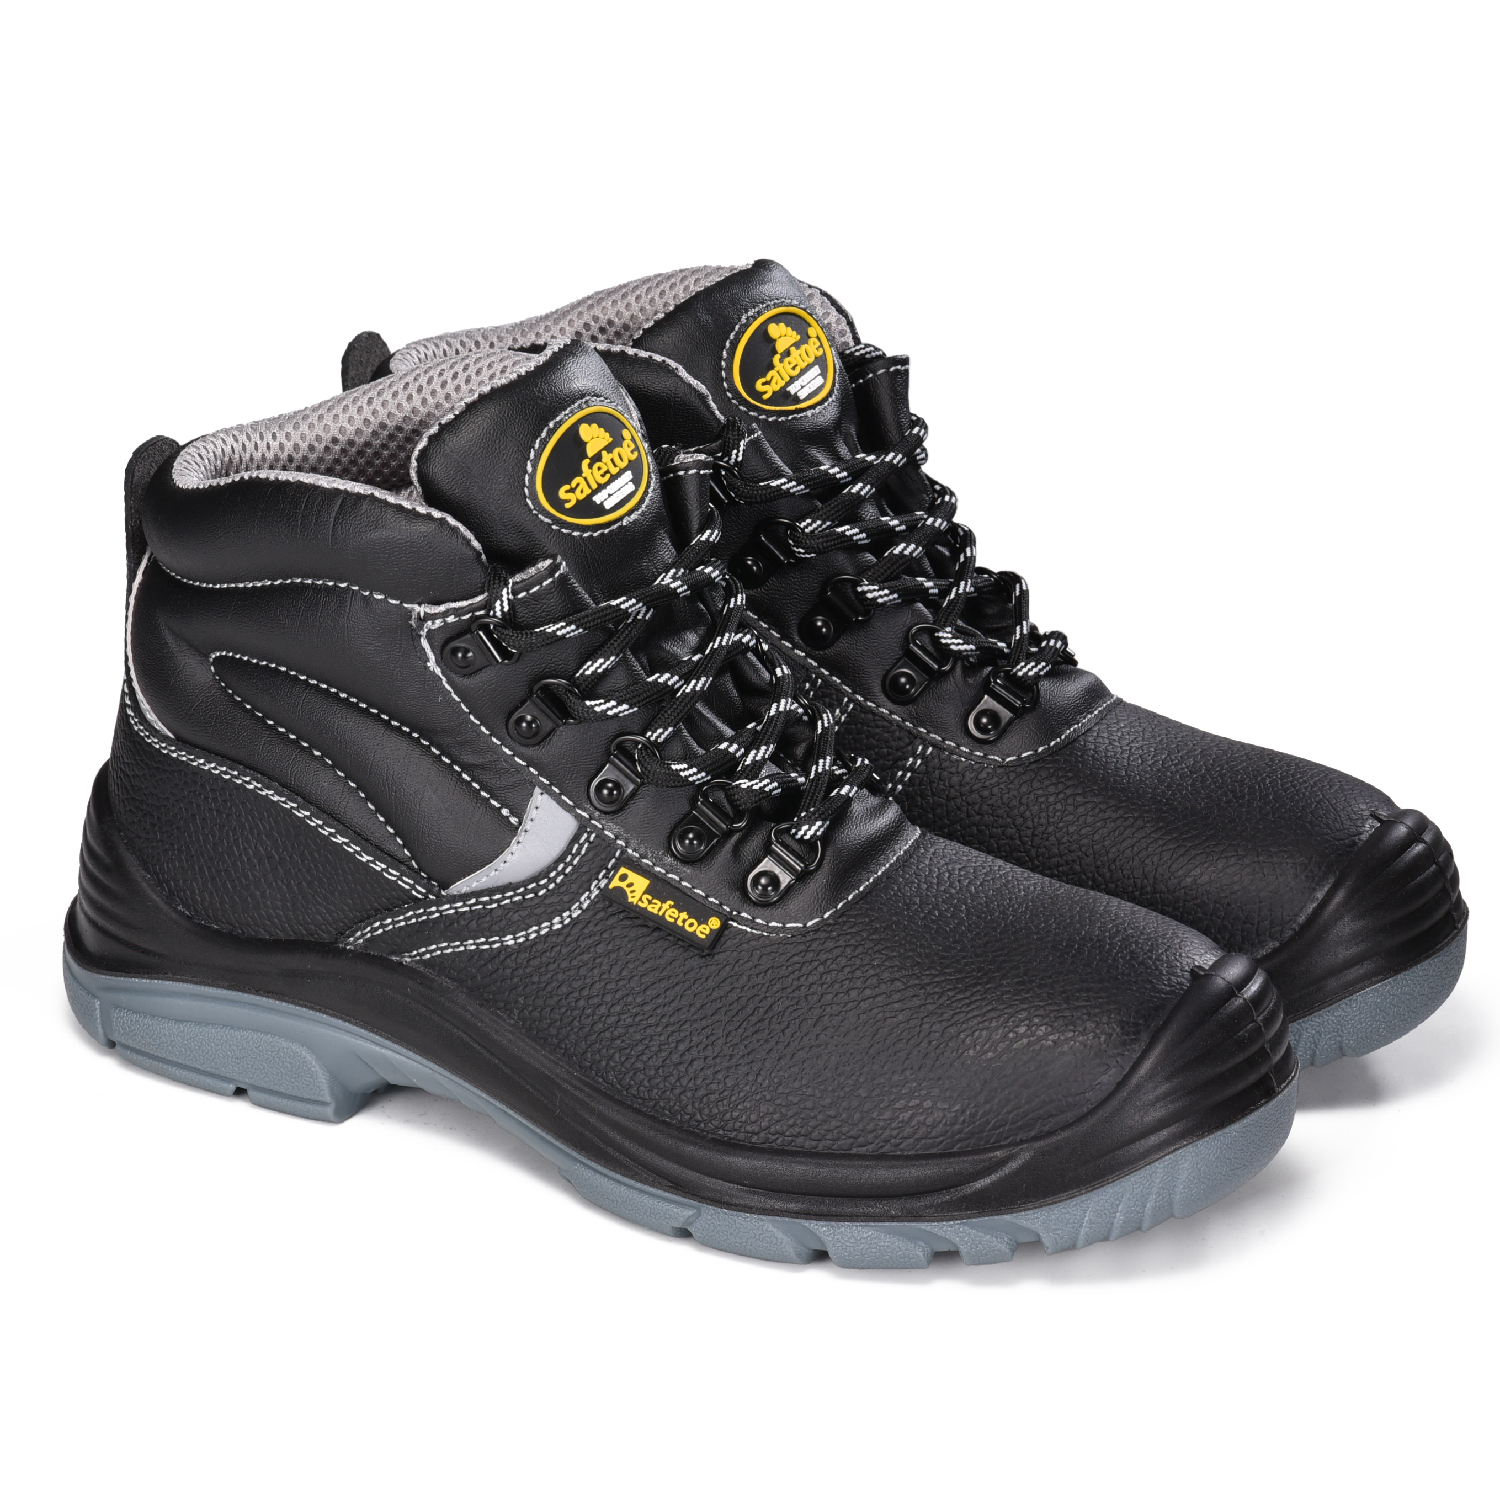 Black Cow Leather Oil Resistant Steel Toe Safety Boots for Men M-8520